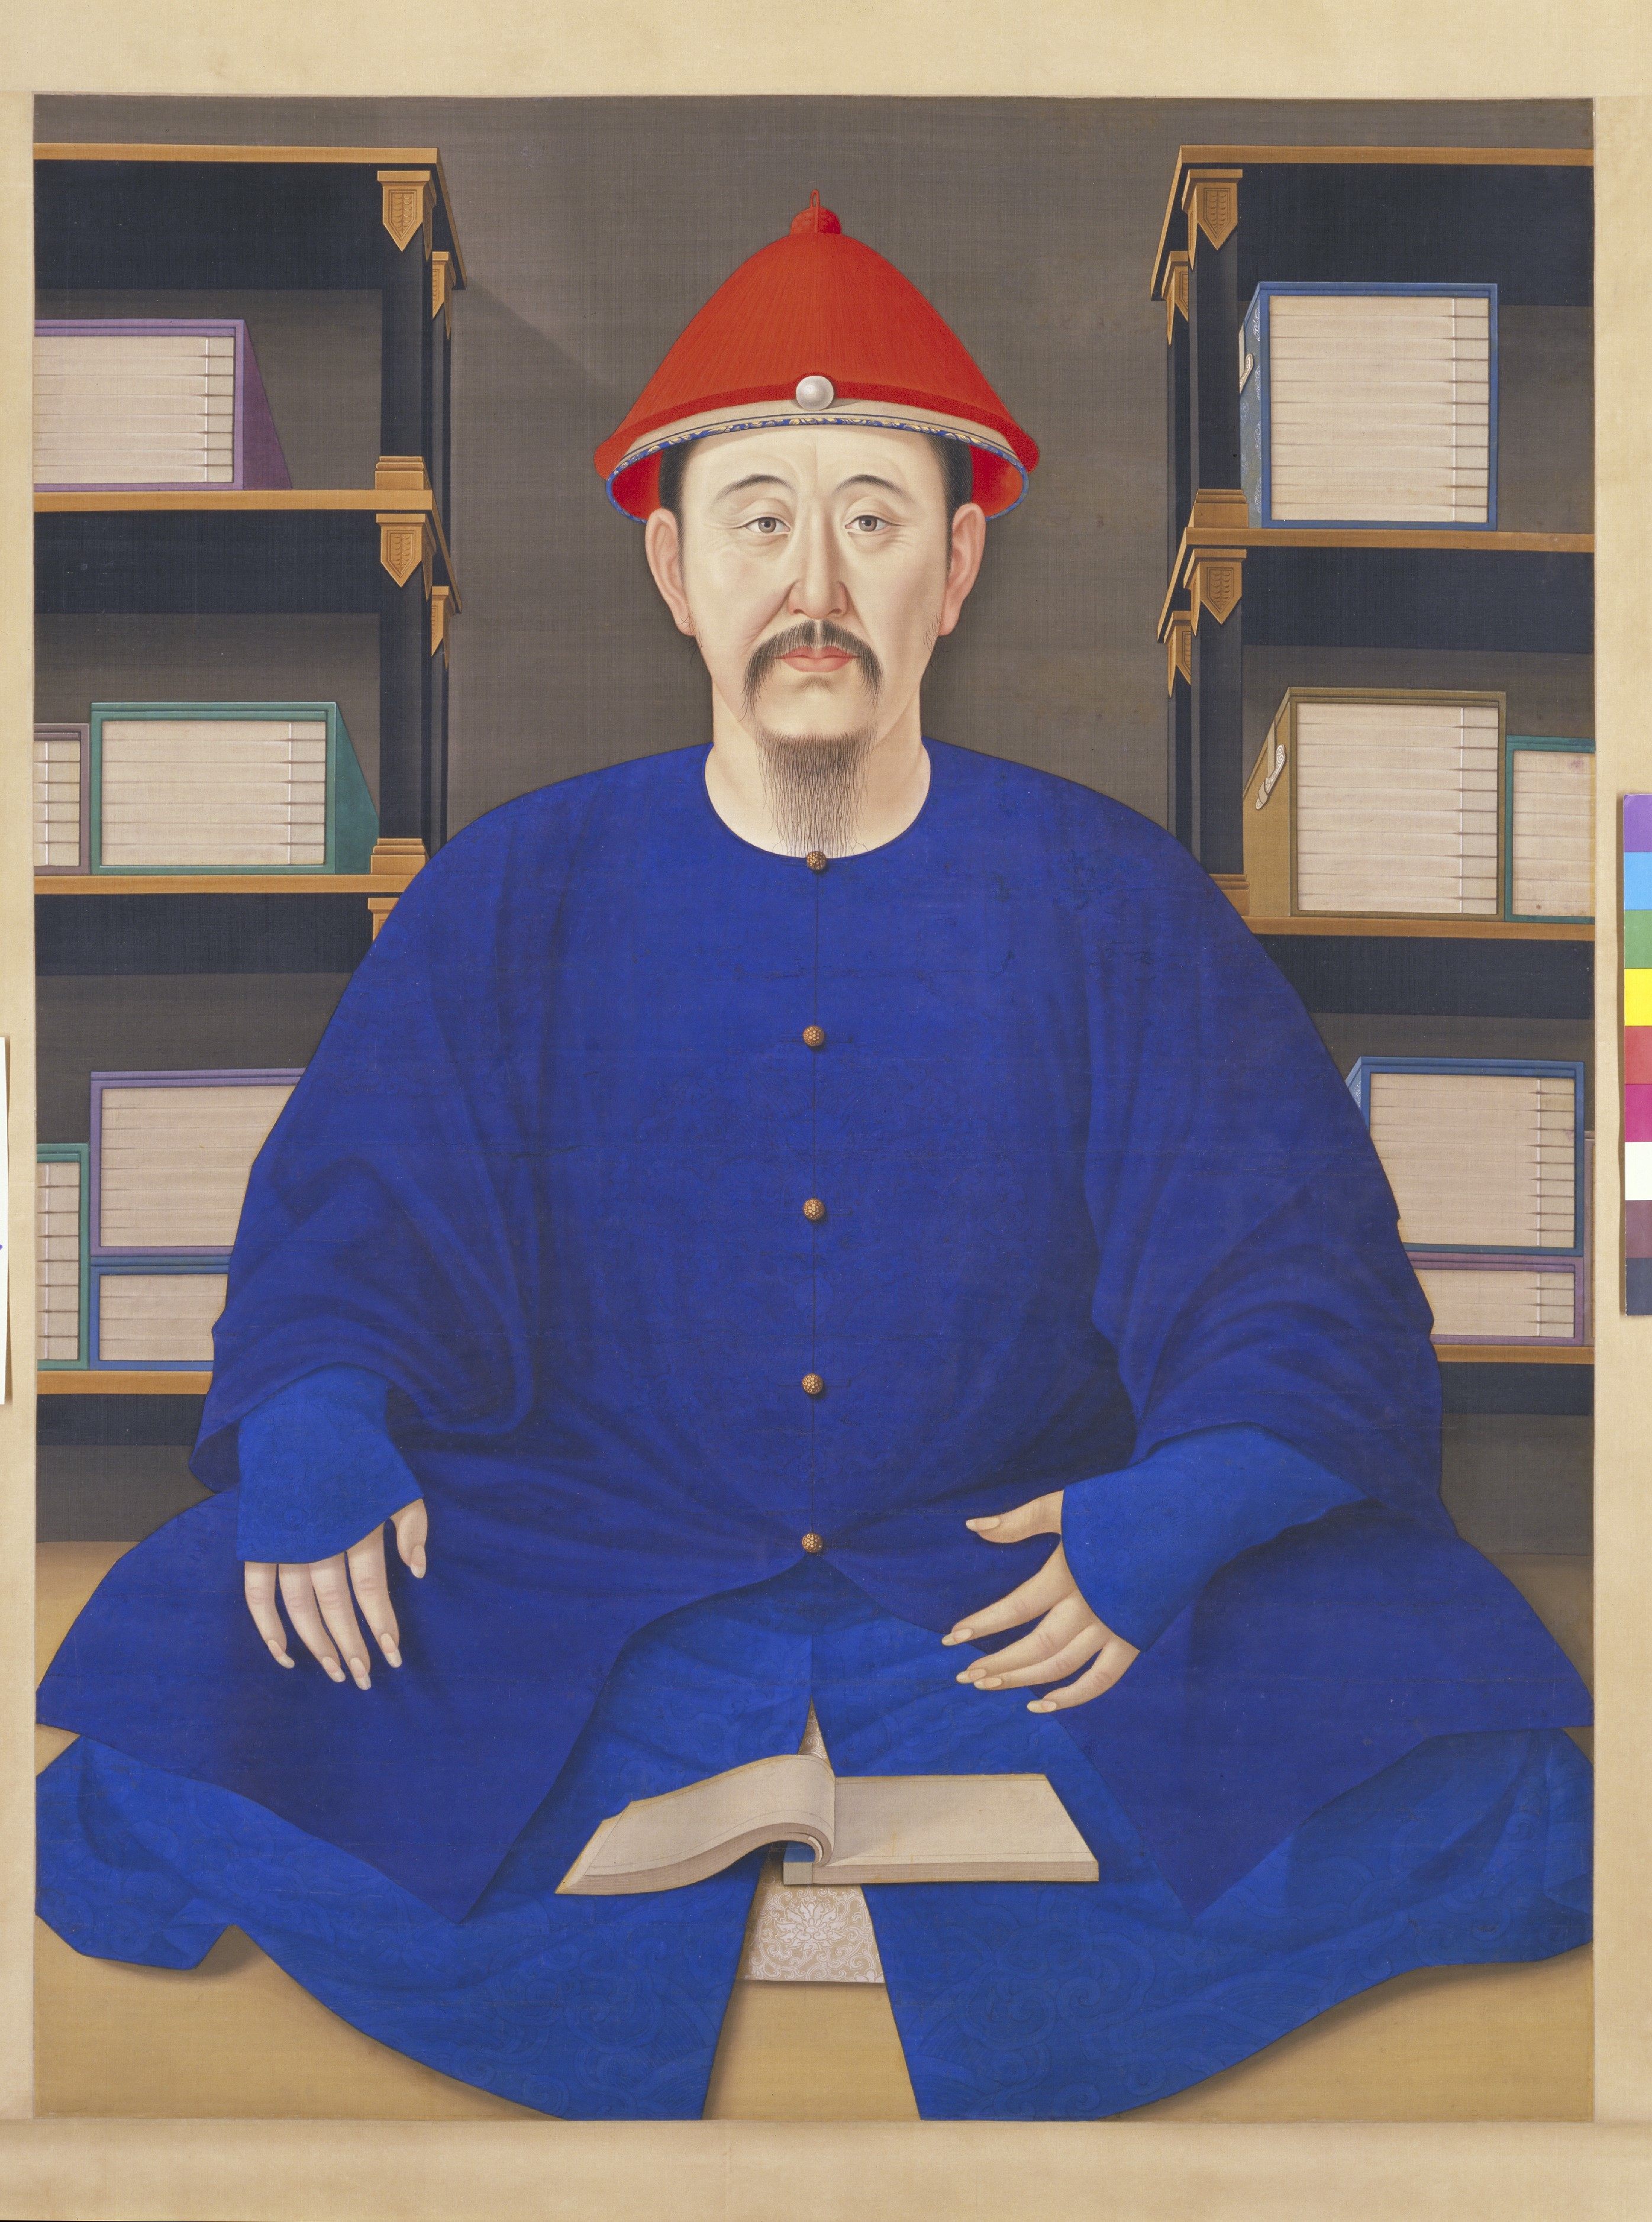 “Kangxi Portrait” (1622). This hanging scroll that will be part of the upcoming CMA exhibition shows the Qing dynasty Emperor Kangxi sitting in front of his books. Photo: The Palace Museum, Beijing